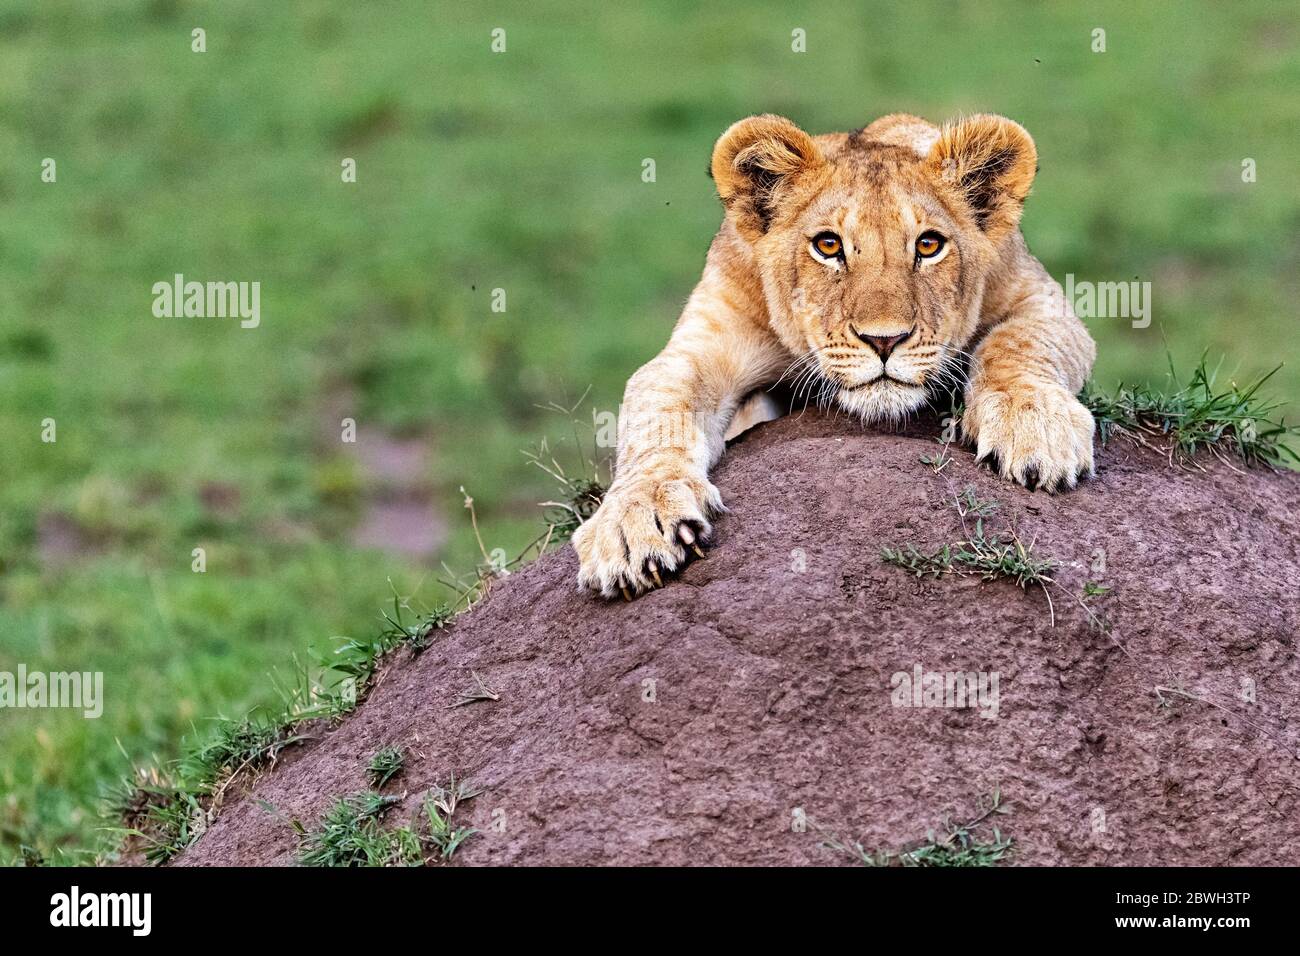 Closeup of cute one year old lion cub hanging on to a termite mound with room for text Stock Photo